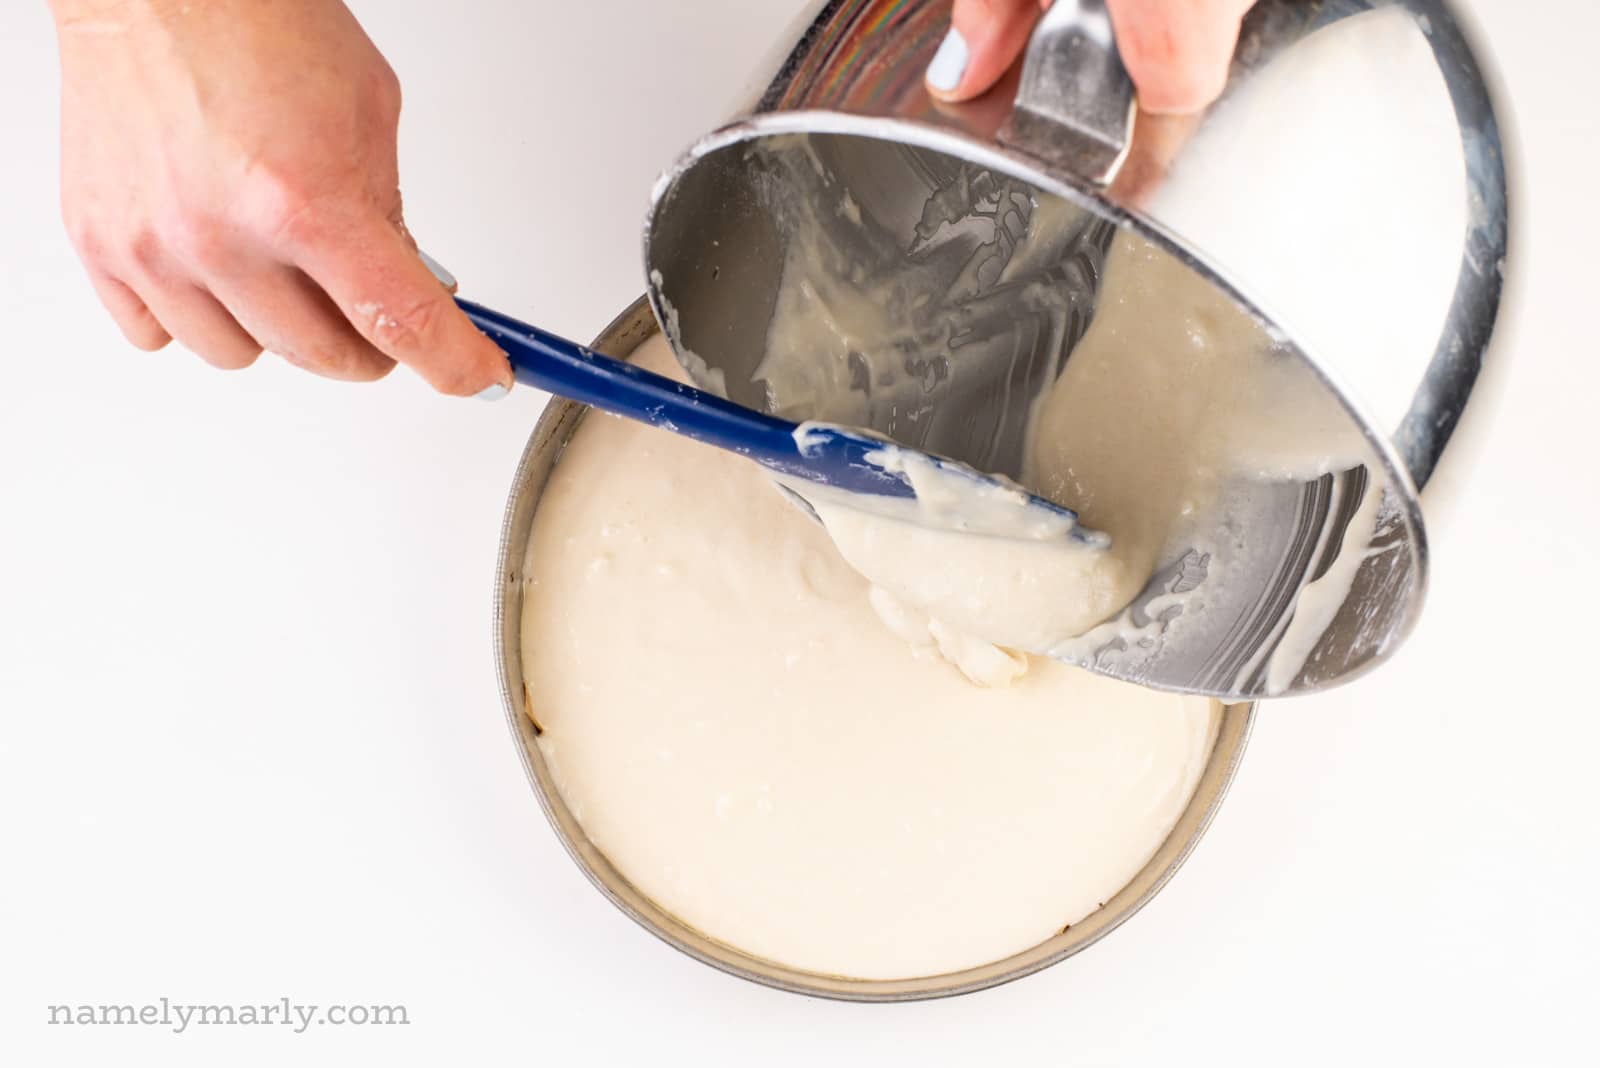 A hand holds a spatula spooning cake batter from a mixing bowl to a cake pan.